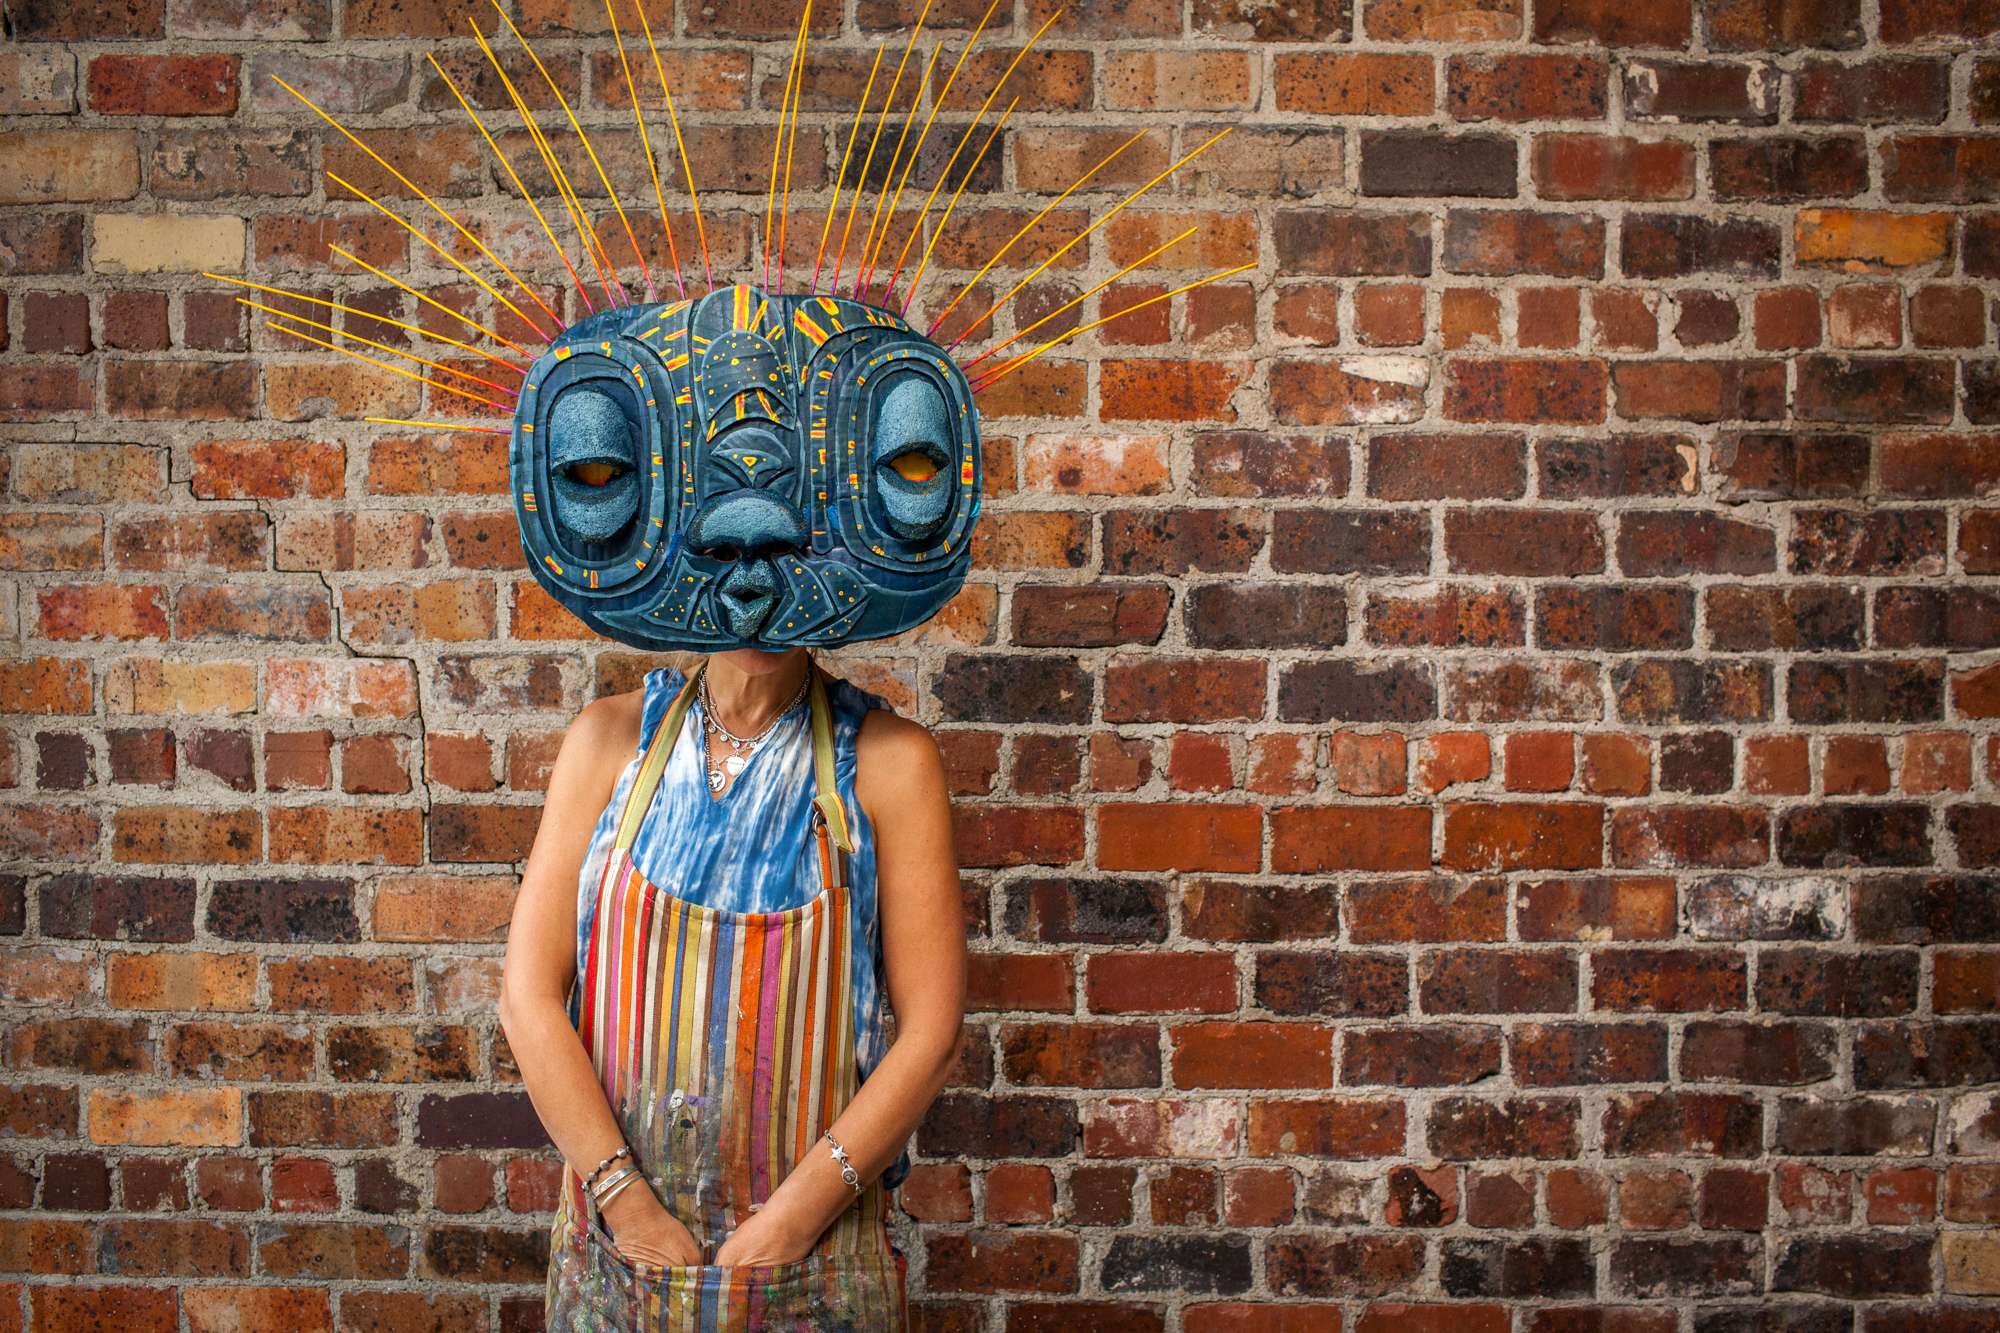 An art student poses against a brick wall wearing an oversize homemade halloween mask that resembles an insect